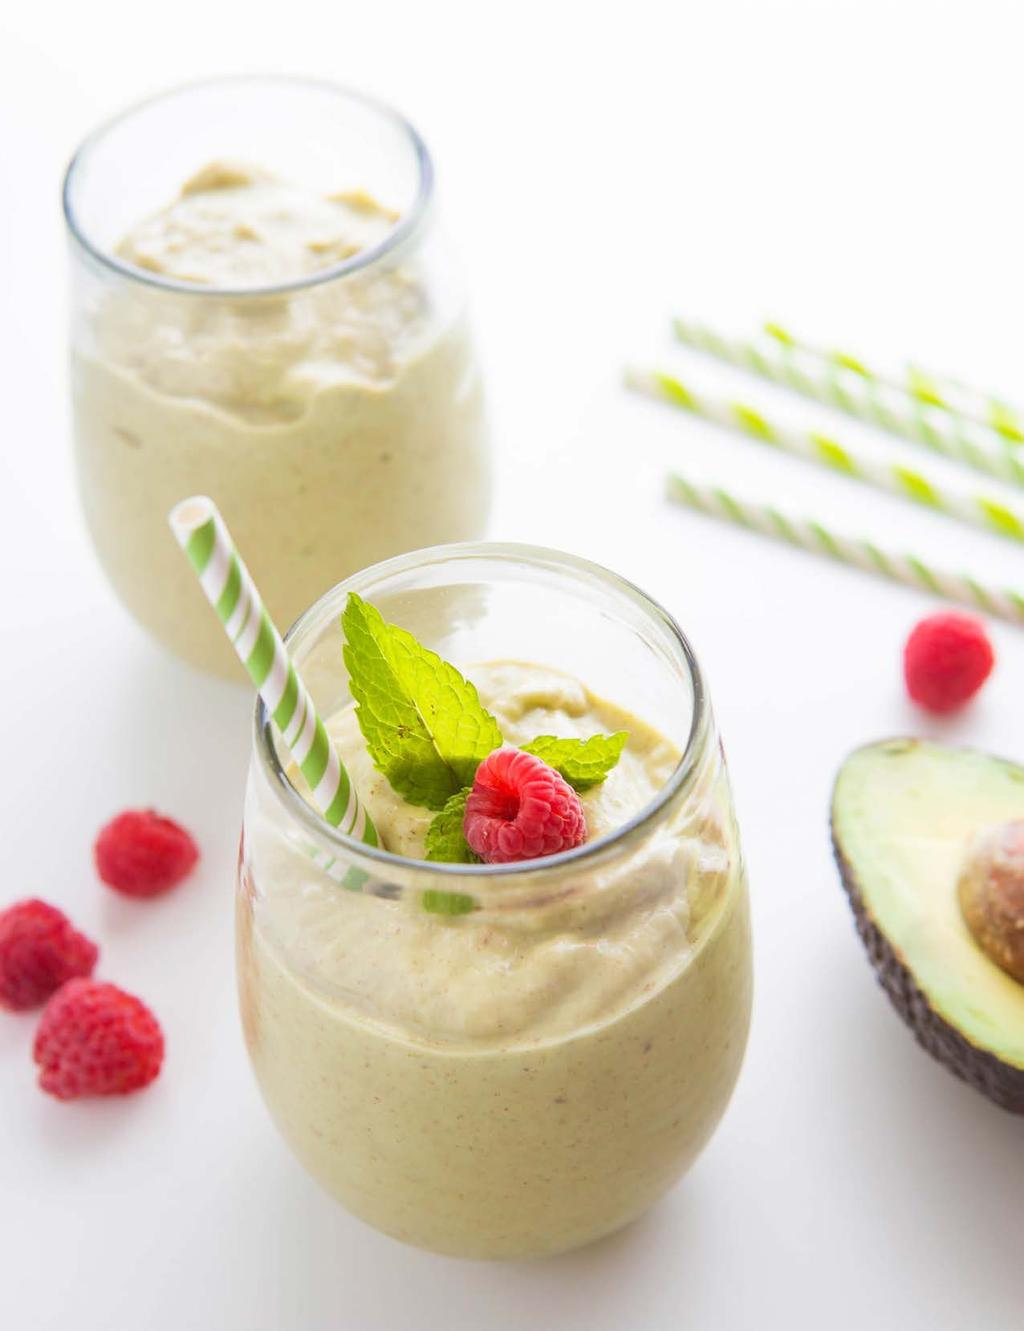 Quick & Healthy Breakfast Favorites 1. Vanilla Almond Keto Protein Shake Low carb and delicious, this dessert-like smoothie is full of healthy fats to keep you satiated for hours.